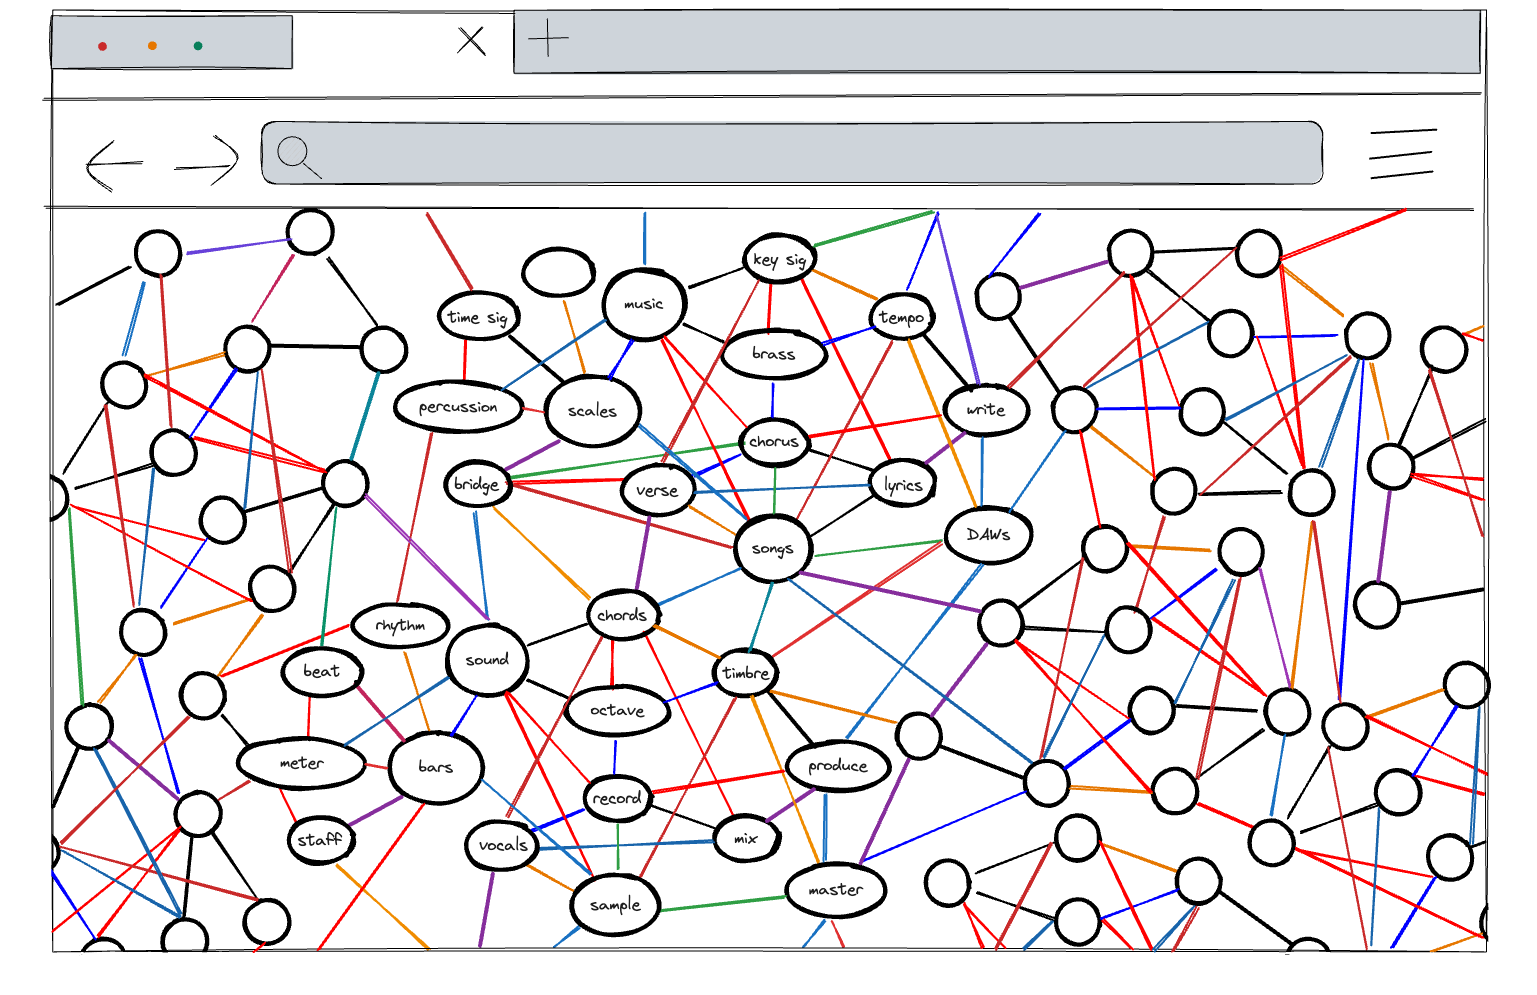 Website mockup with an extremely dense graph, featuring over 50 nodes that are basically illegible, with 2-5 links between each node and some partial nodes visible and other links extending off the webpage boundary. It’s chaotic and stressful looking.